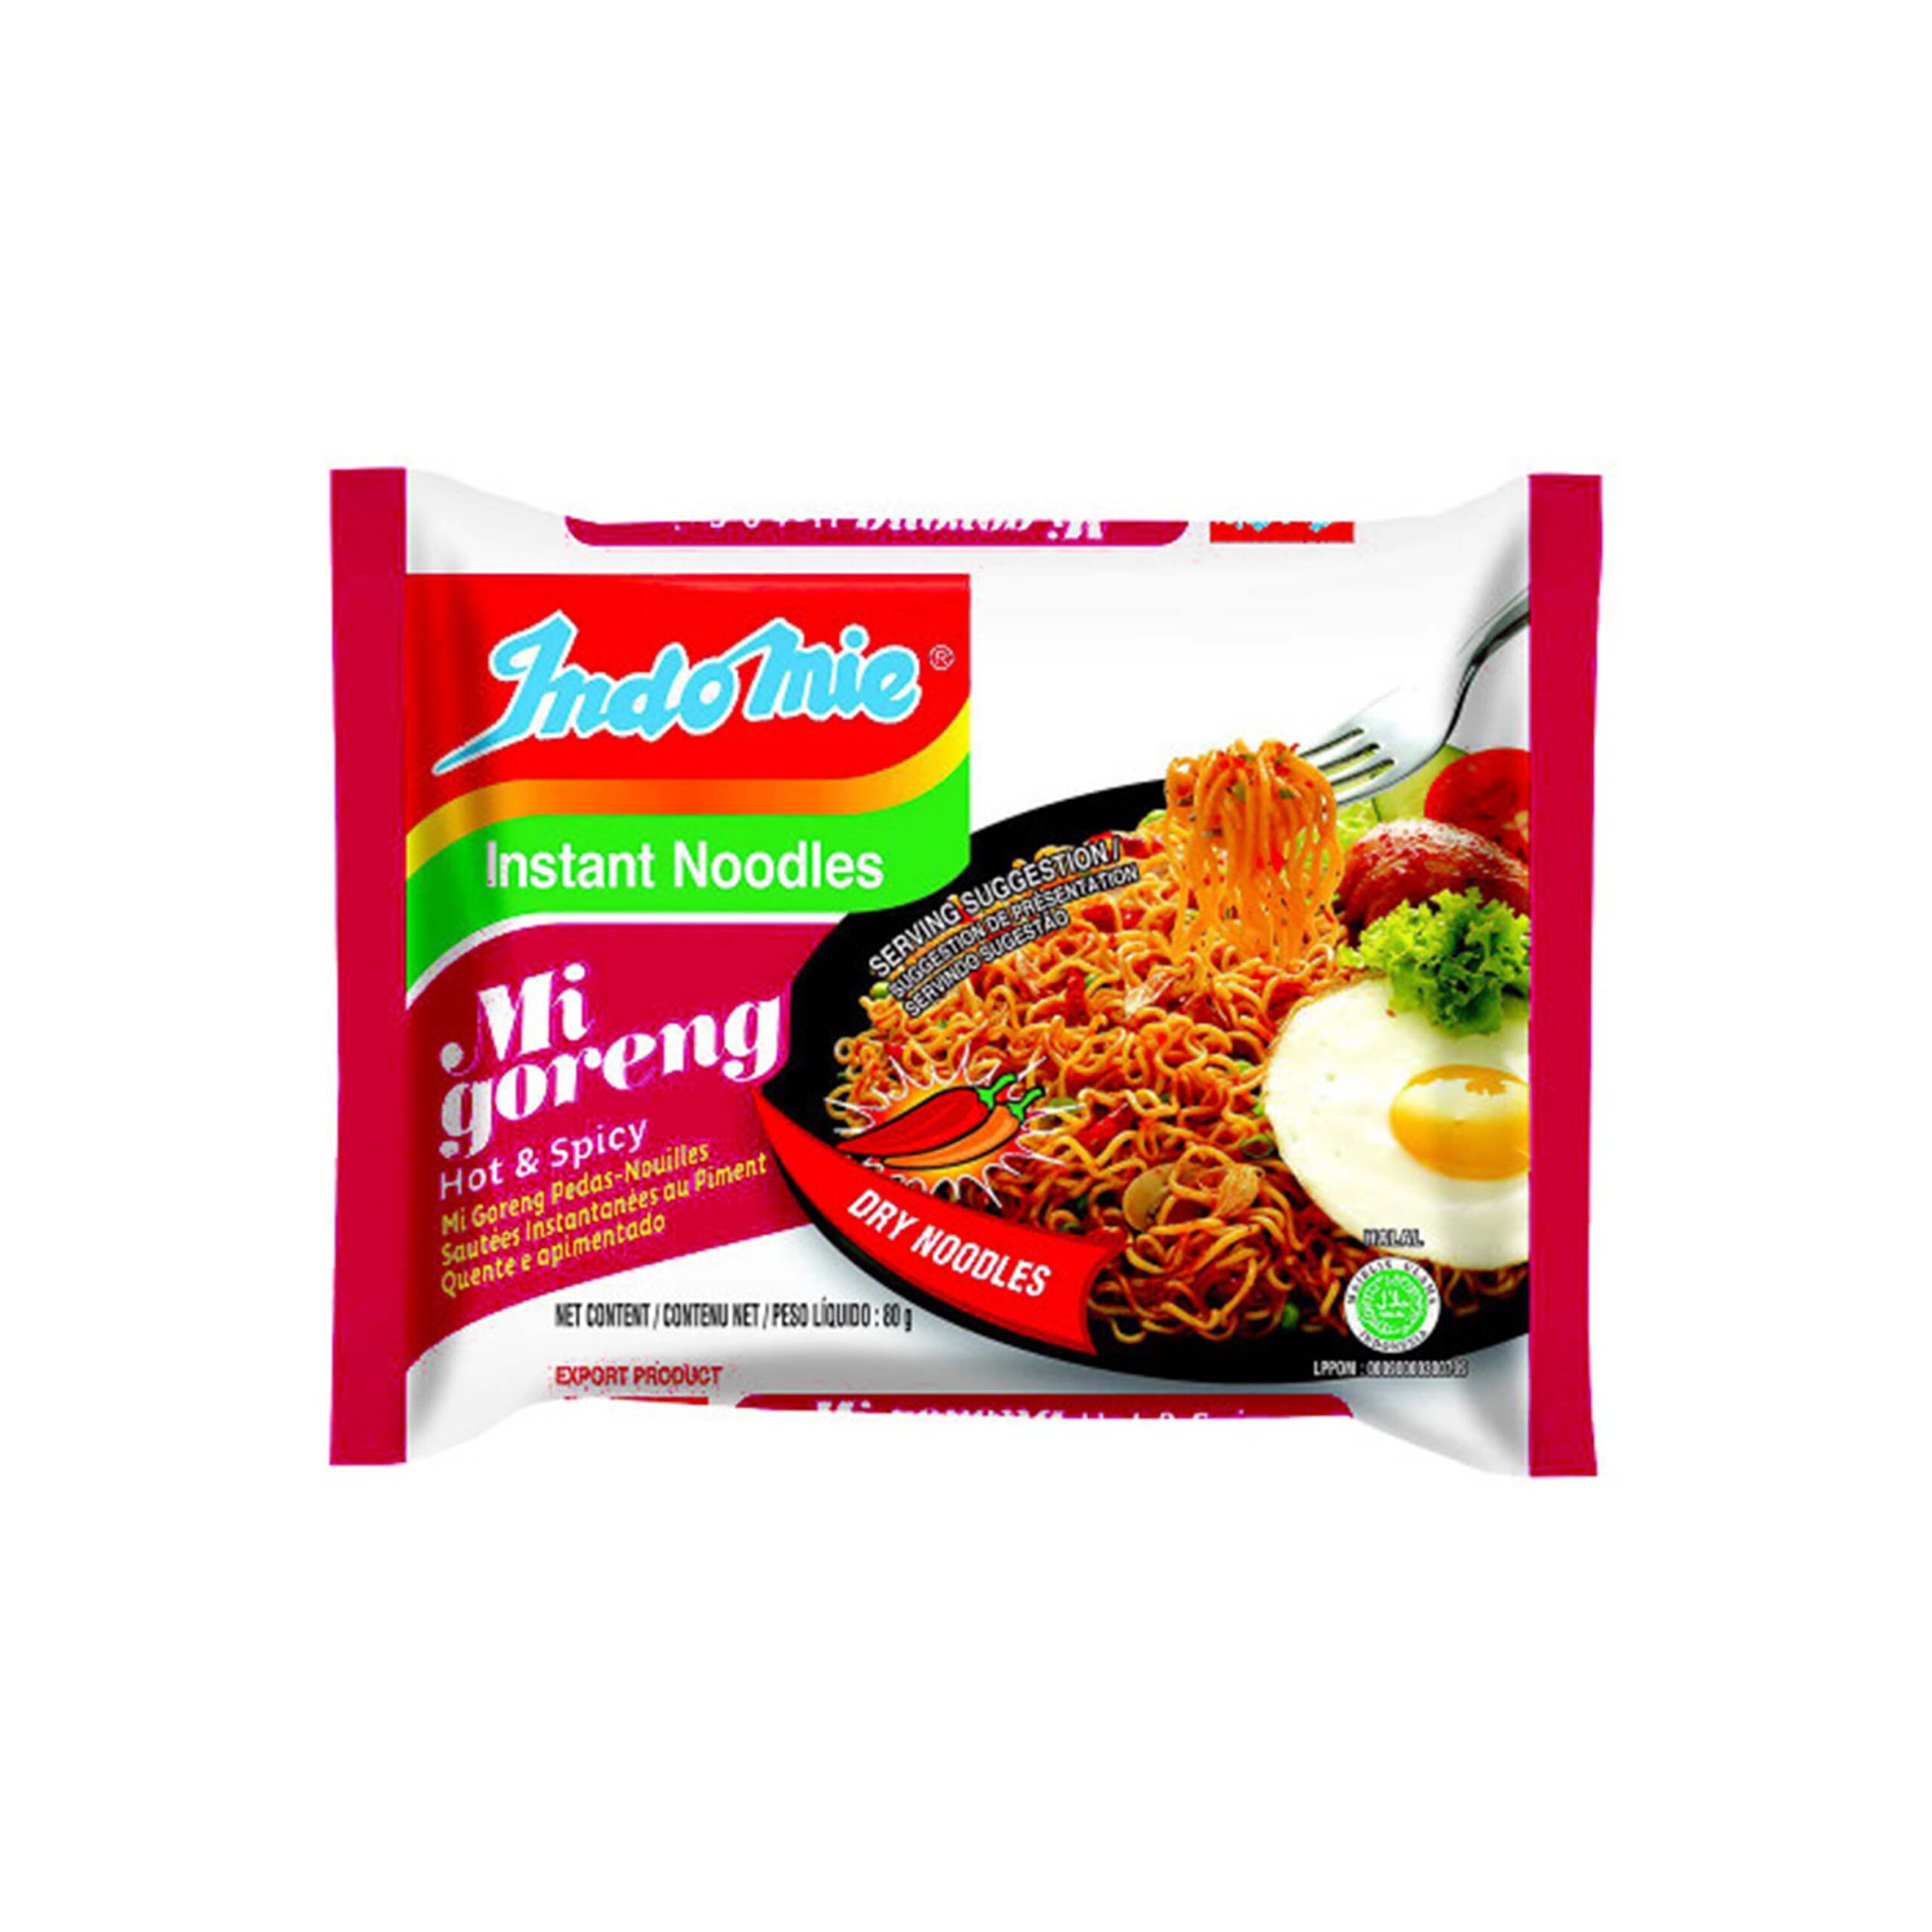 INDO MIE INSTANT NOODLES  70g